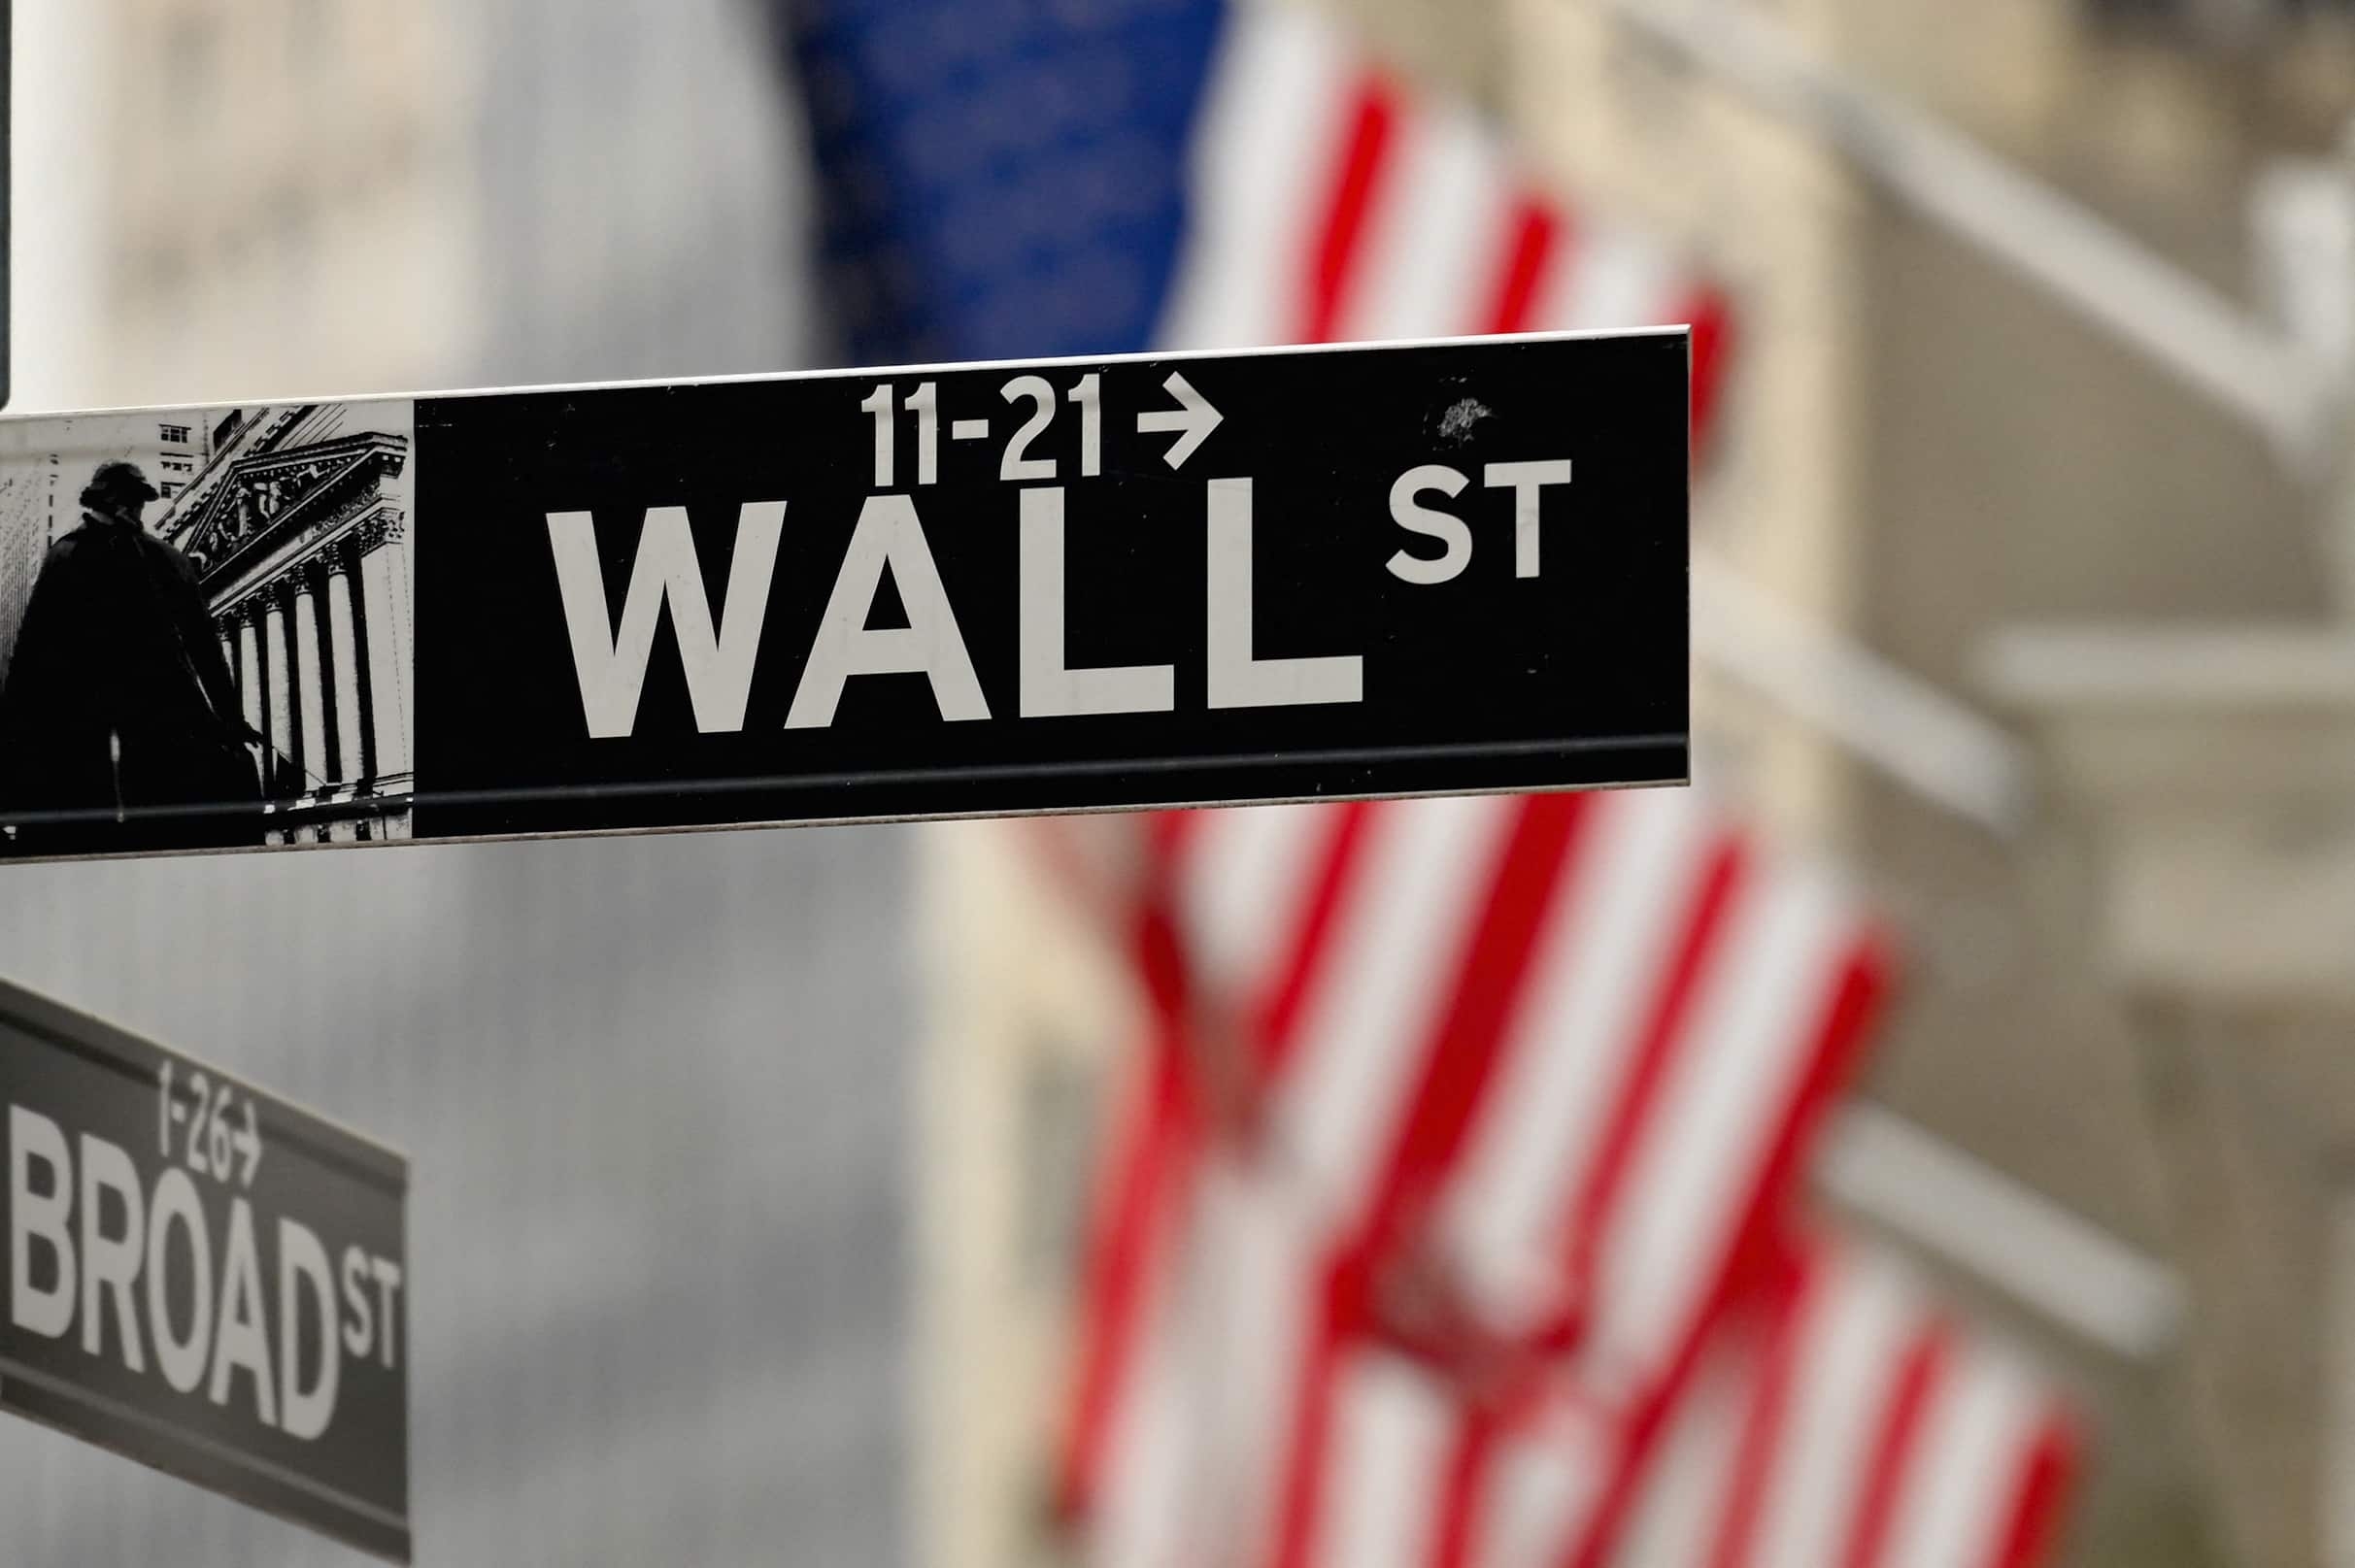 Wall Street's main indexes rose on Monday, boosted by megacap tech and growth stocks and a surge in Twitter after Elon Musk revealed his stake in the company, amid cautionary signals in the bond market and talk of more sanctions against Russia over Ukraine. The Dow Jones Industrial Average rose 103.61 points, or 0.3 percent, to 34,921.88, the S&amp;P 500 gained 36.78 points, or 0.81 percent, at 4,582.64 and the Nasdaq Composite added 271.05 points, or 1.9 percent, at 14,532.55.